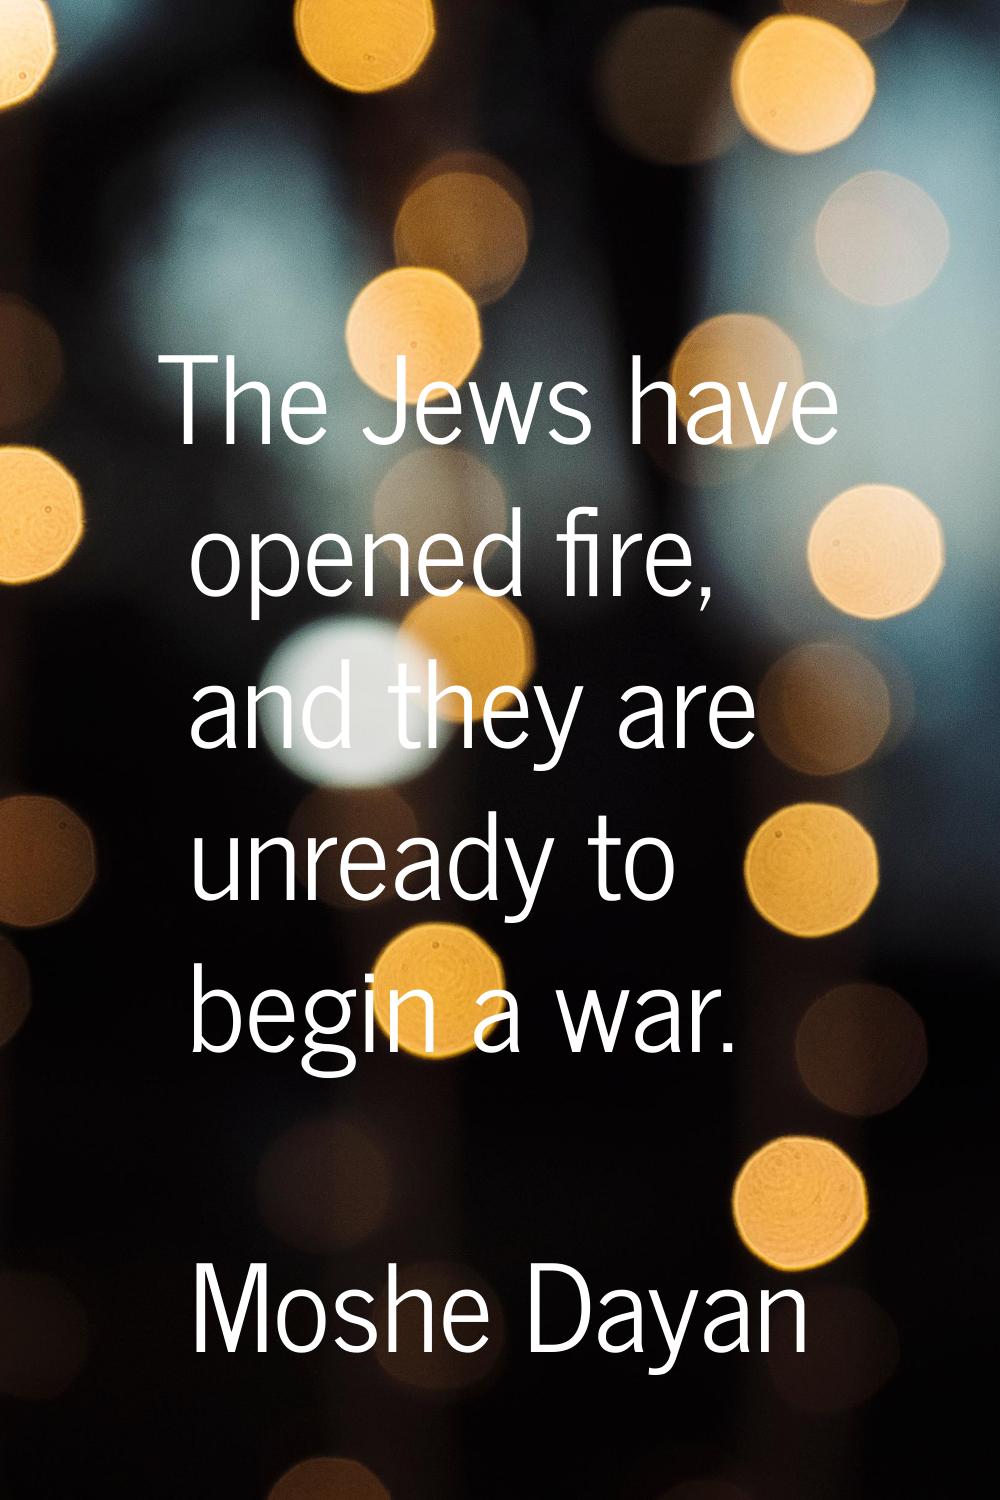 The Jews have opened fire, and they are unready to begin a war.